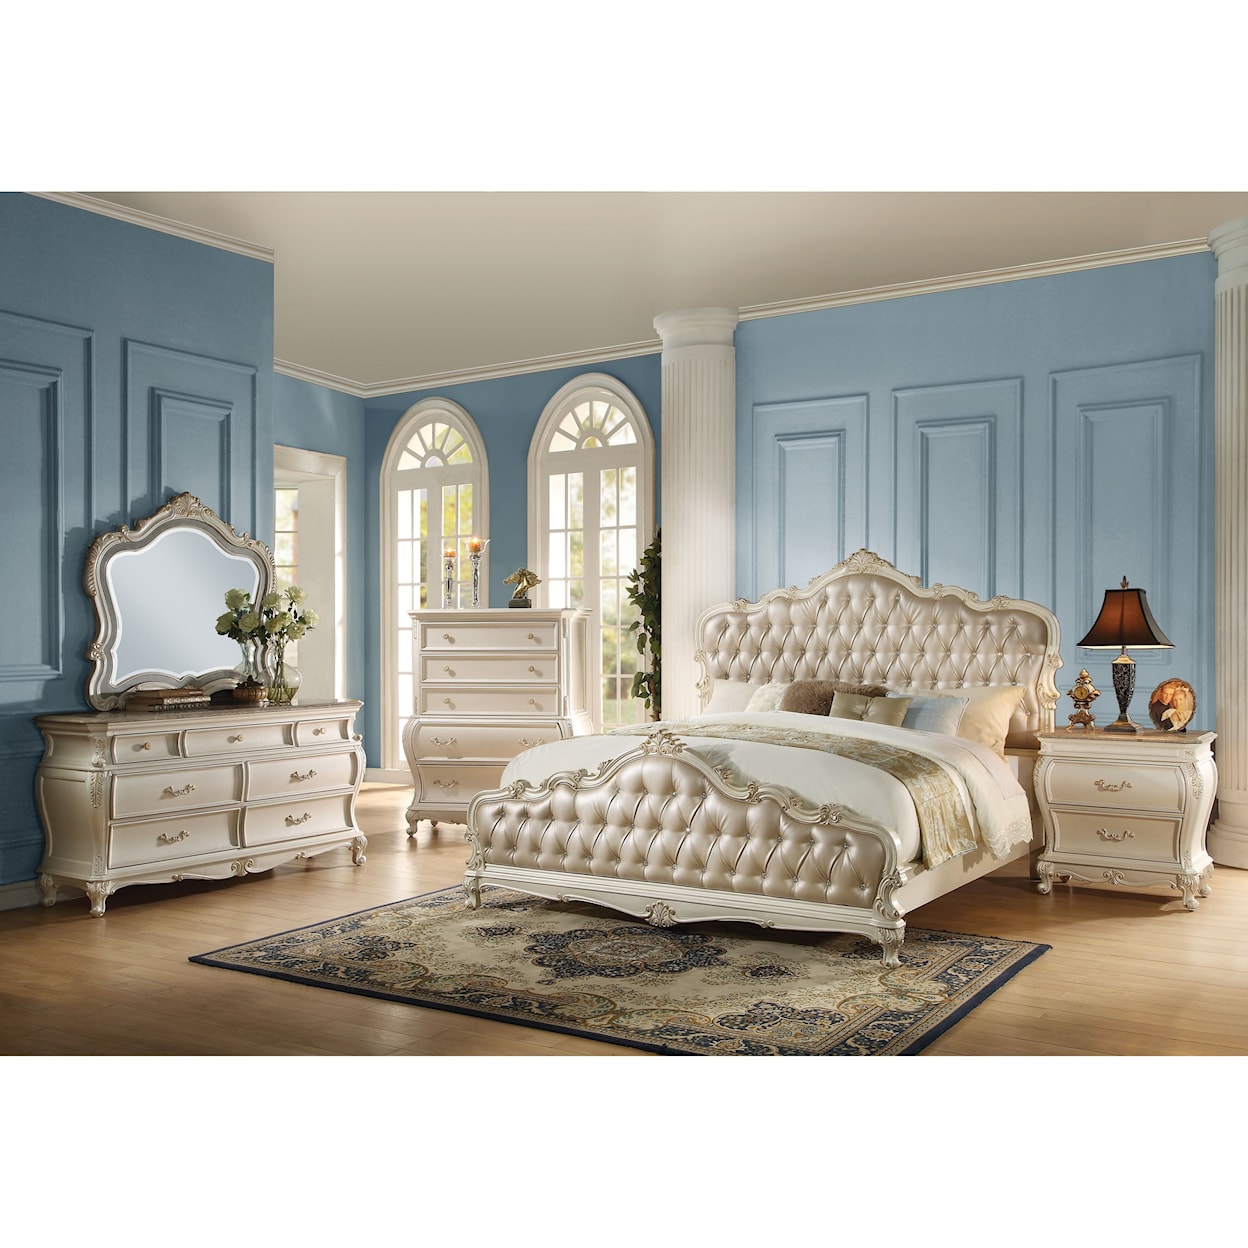 Acme Furniture Chantelle CA King Bedroom Group